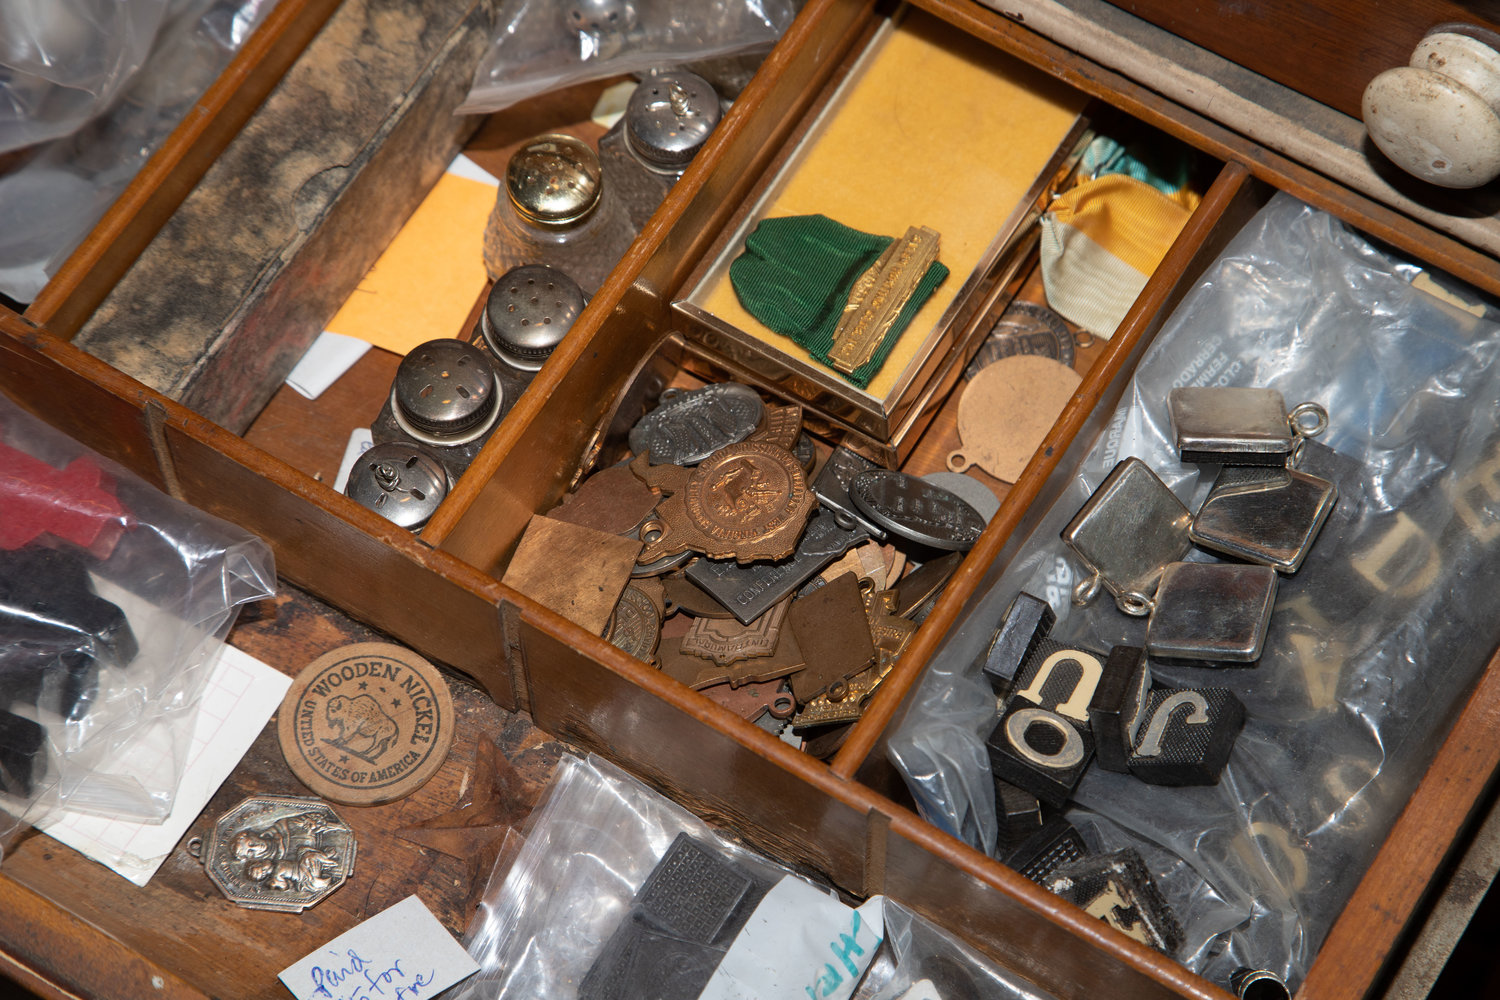 A drawer full of "smalls" wait for Anne Jansen's creative mind to turn them into jewelry.